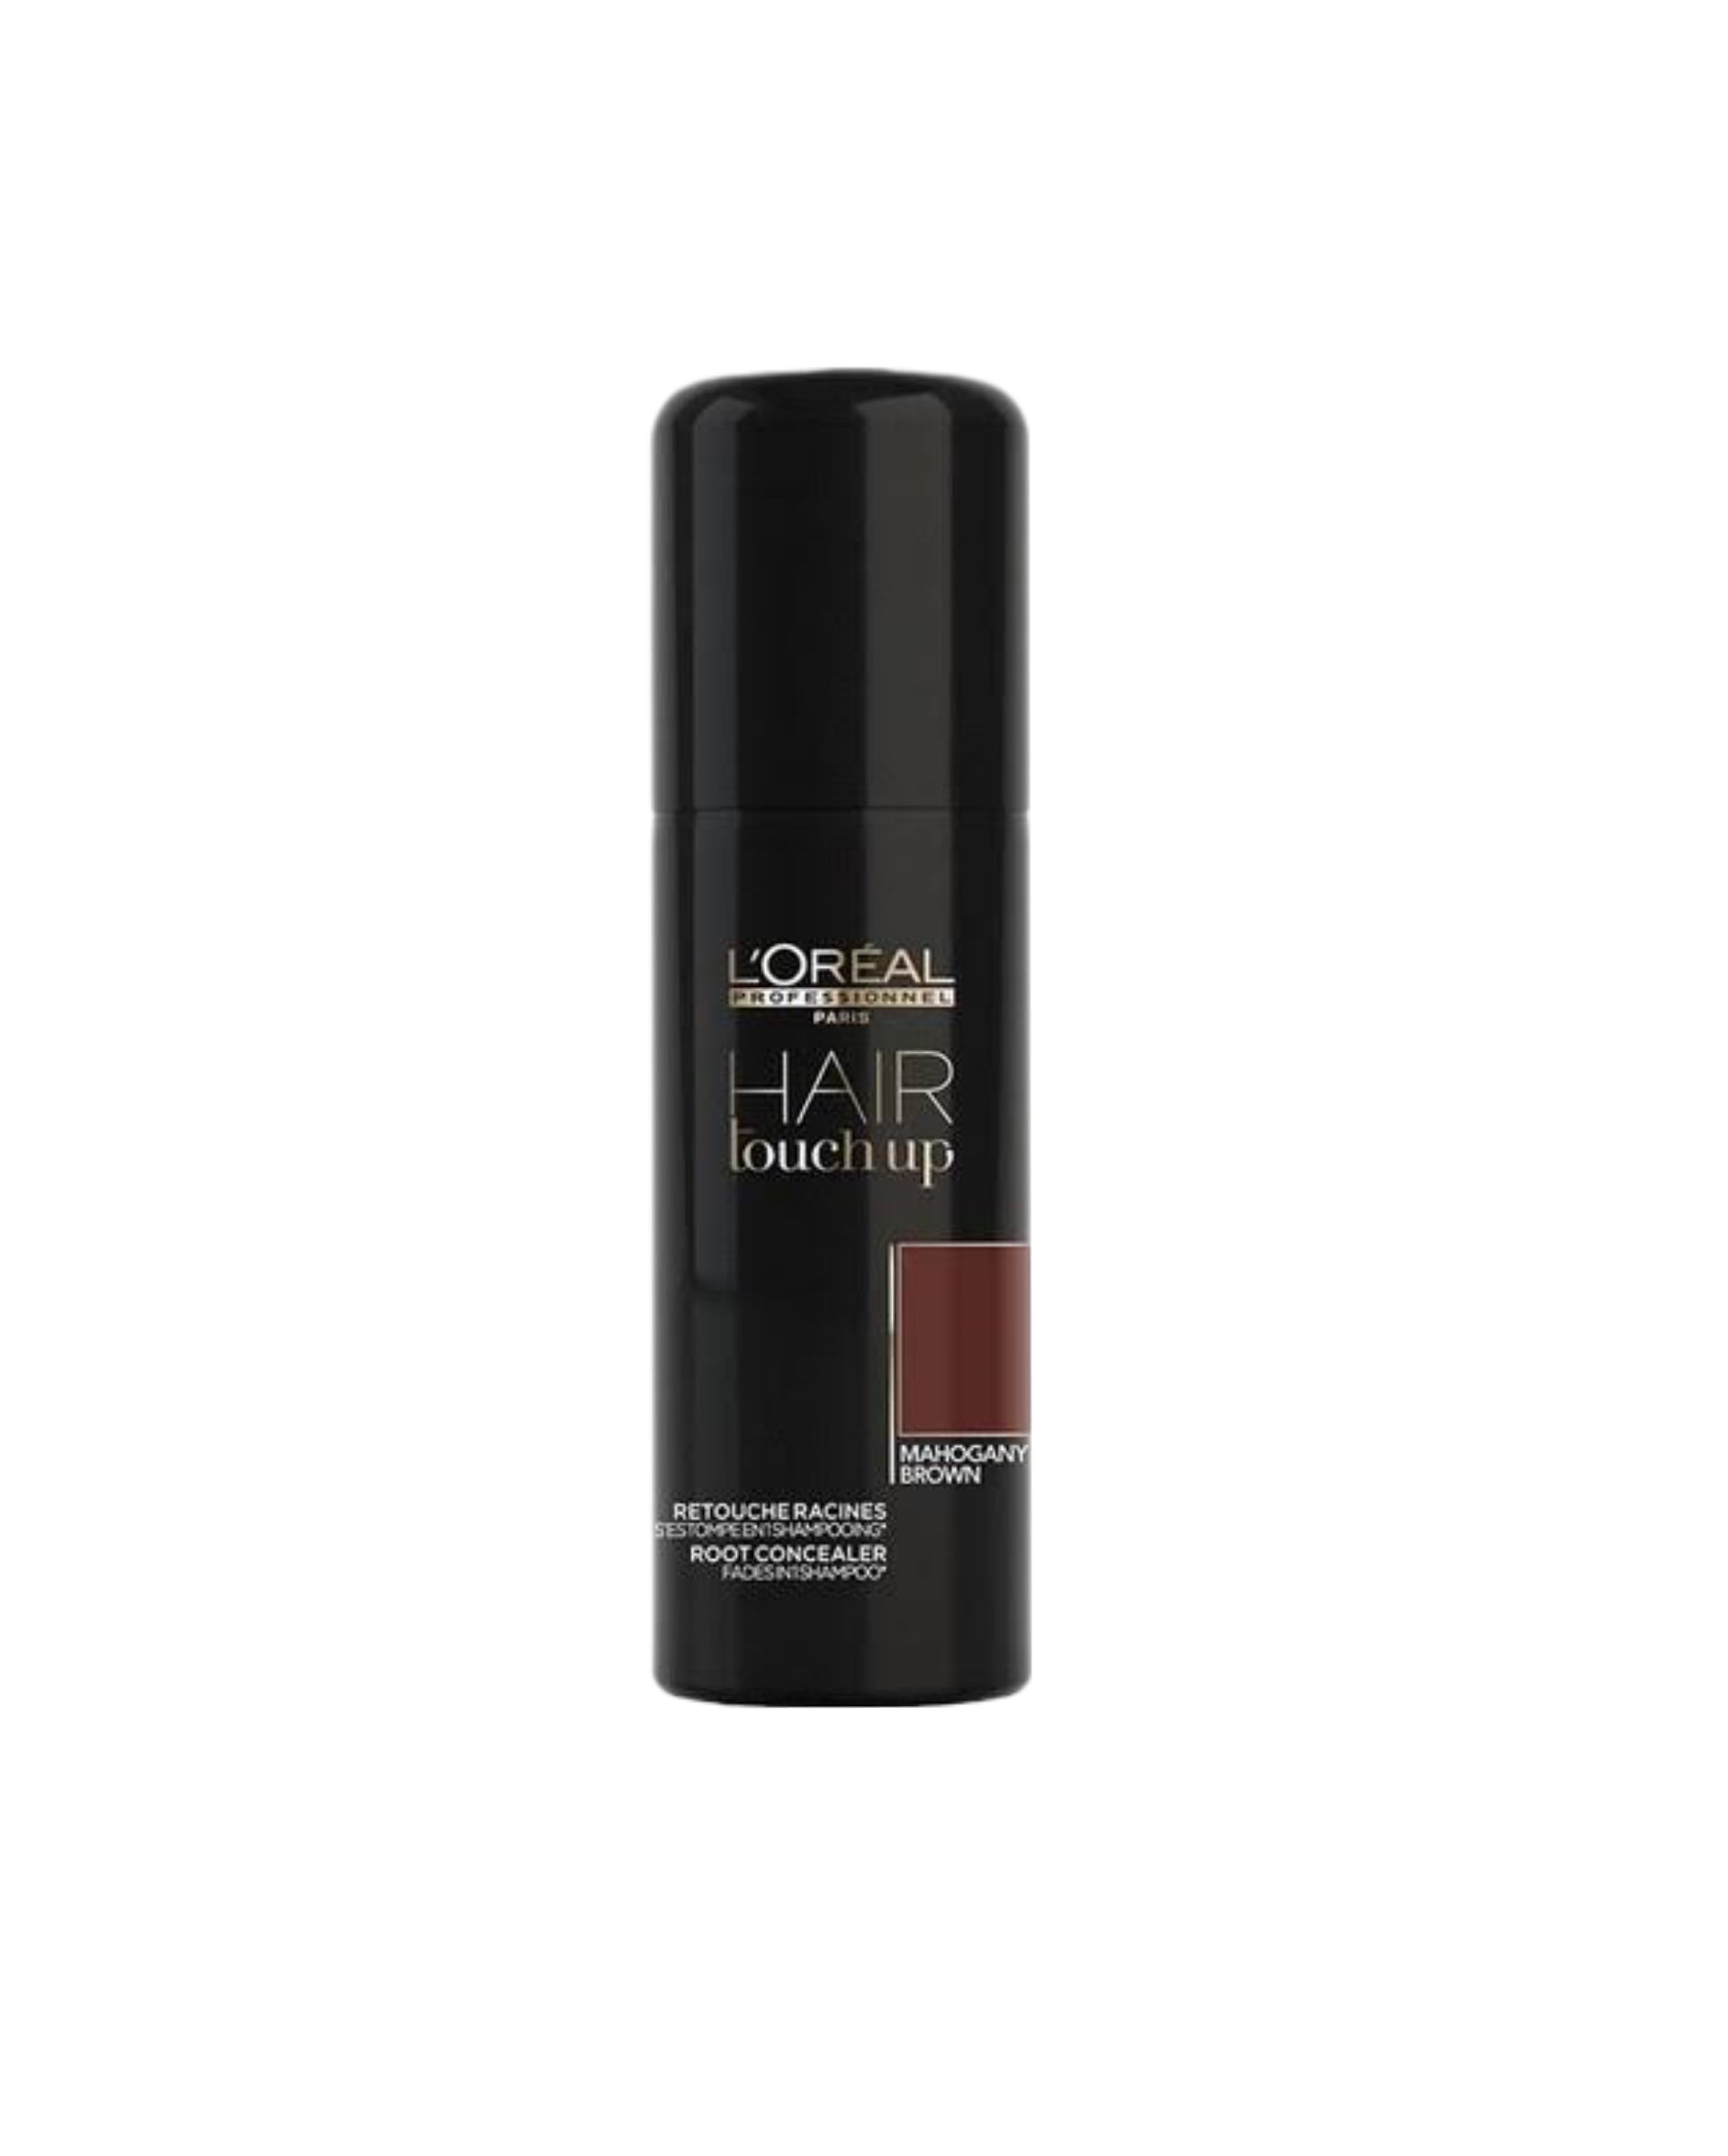 L'OREAL Professional Pairs Hair Touch Up